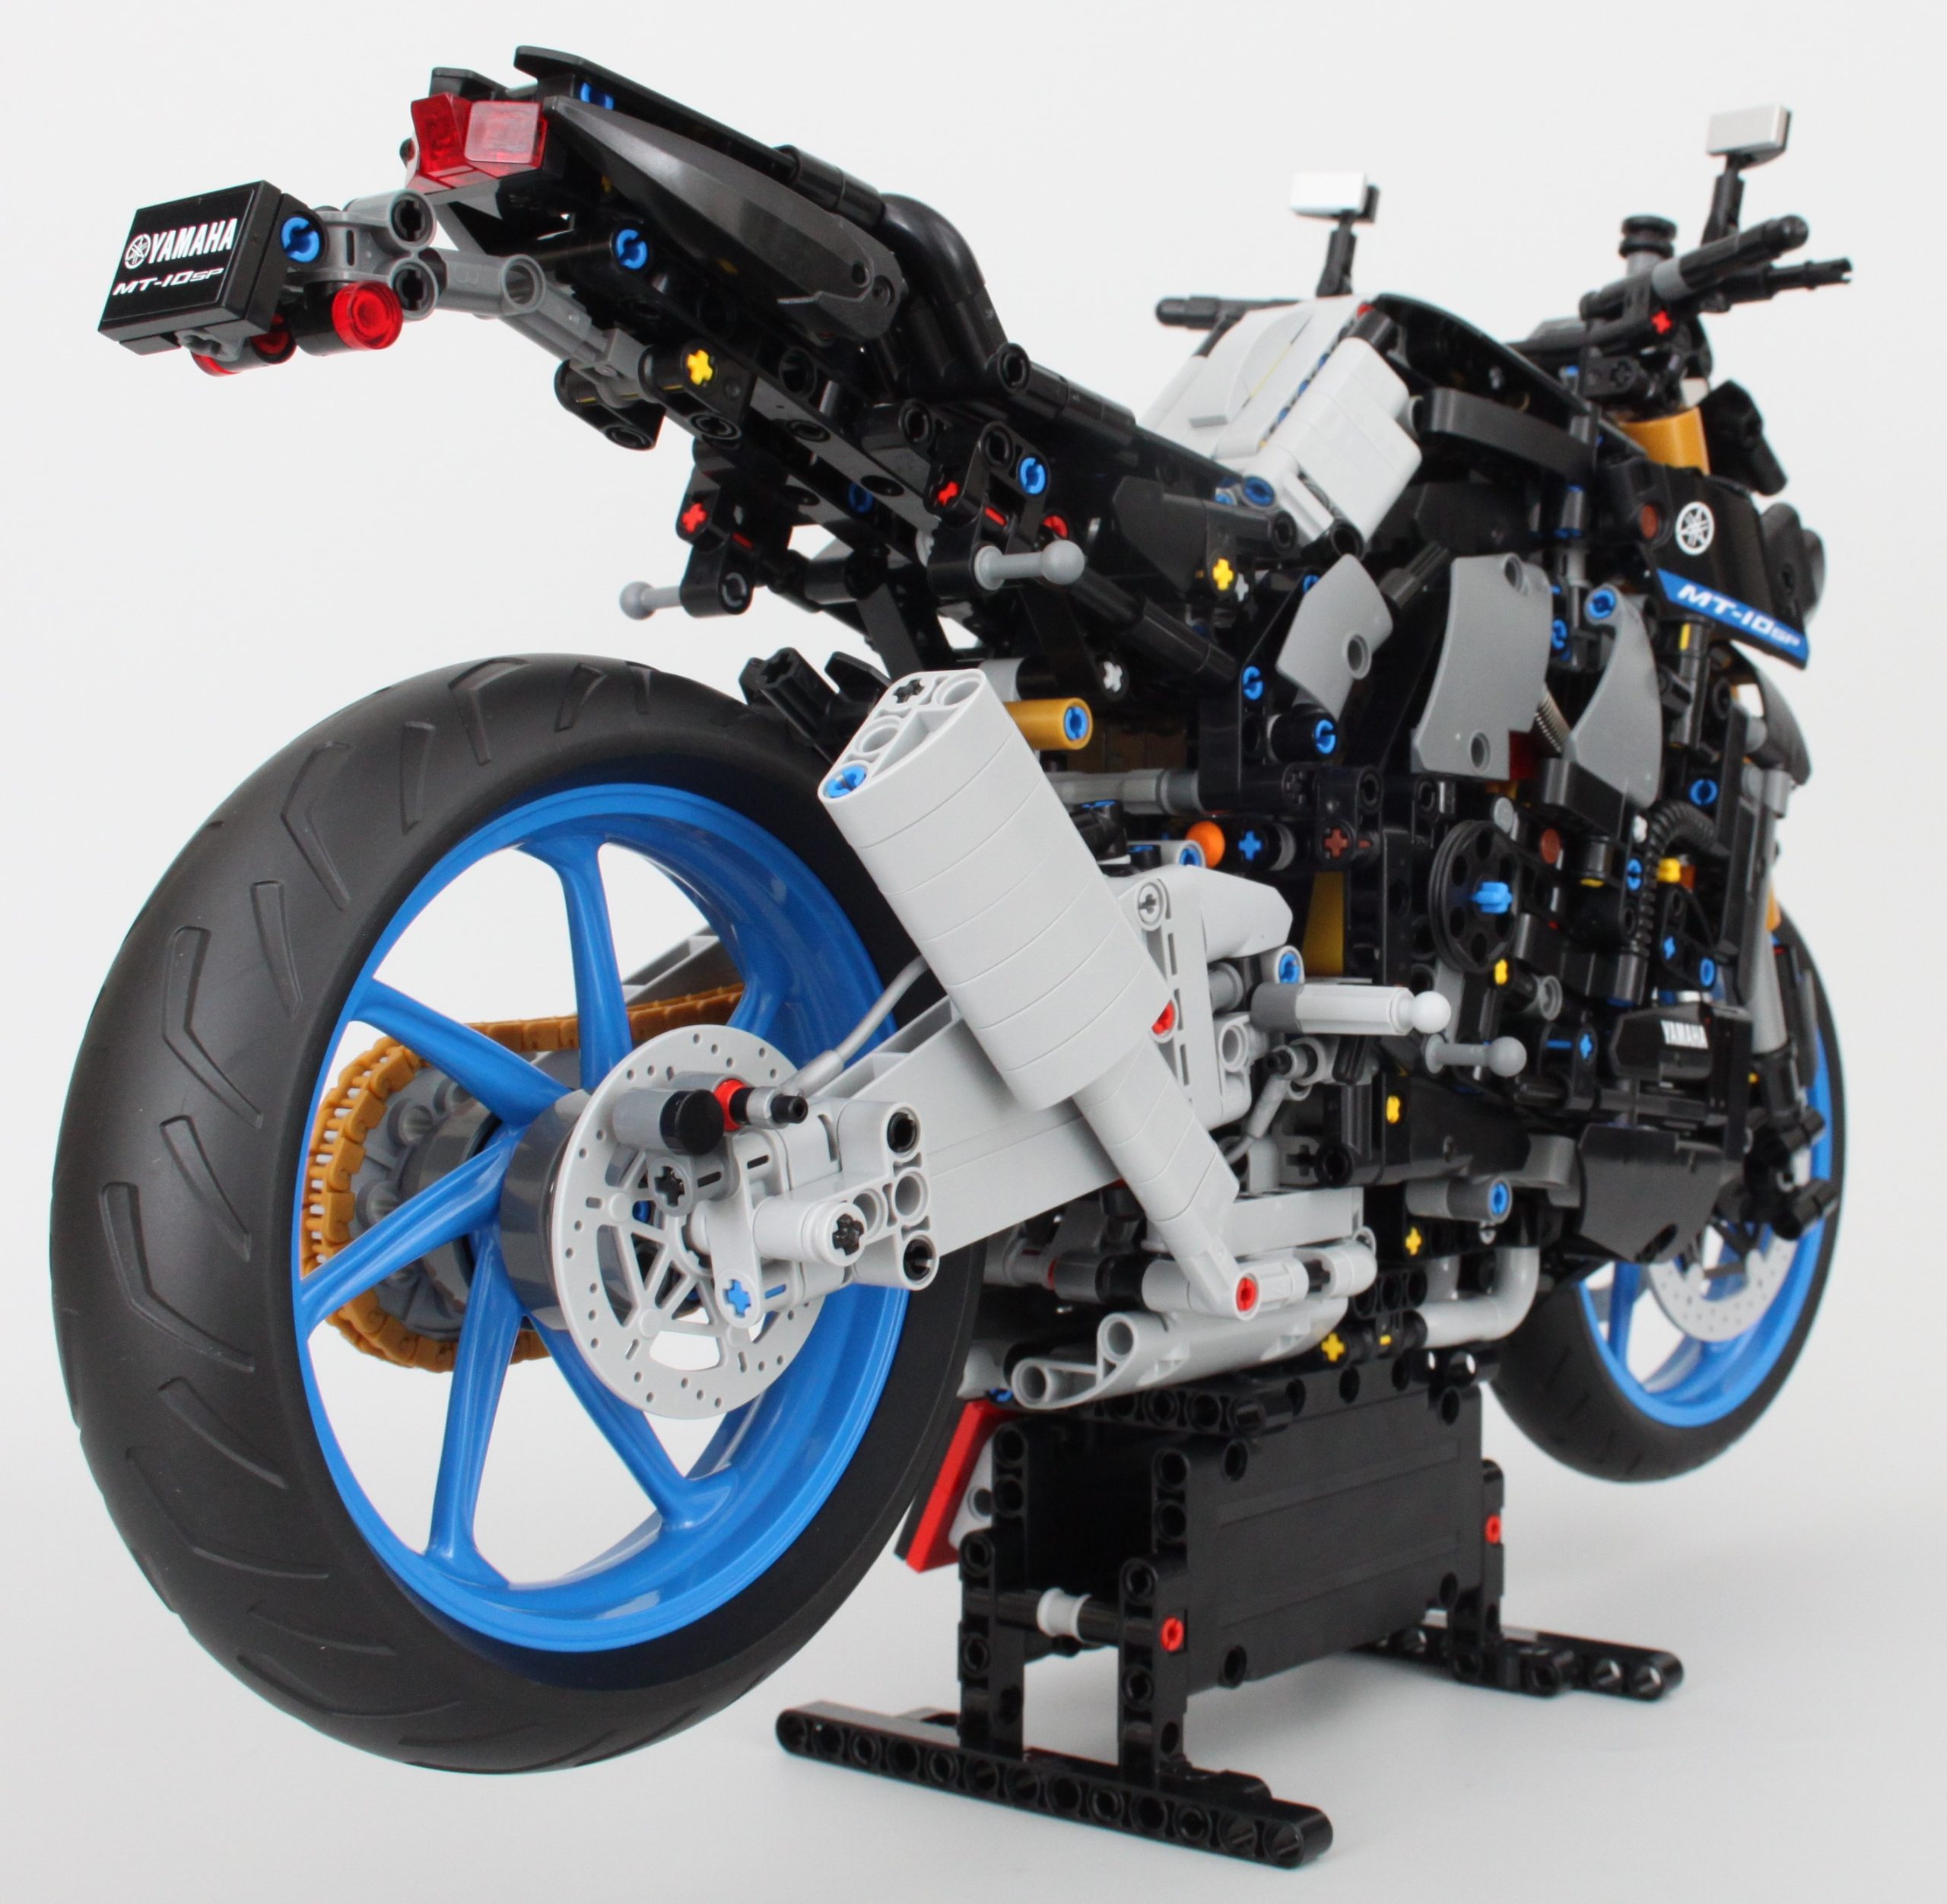 LEGO Technic 42159 Yamaha MT-10 SP Available from August 1st